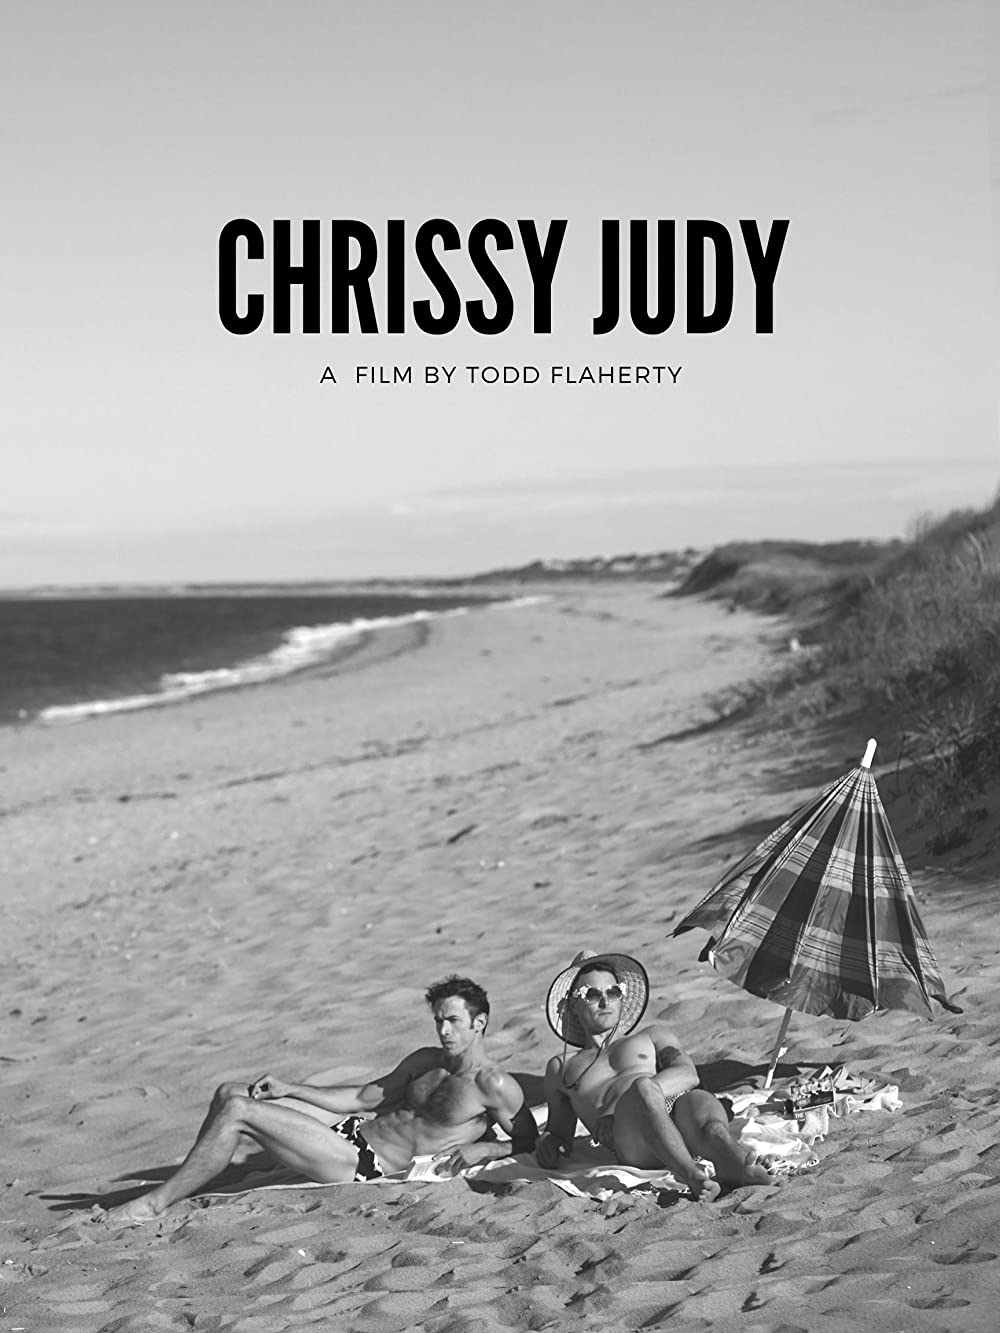 Nude Beach Lesbian Seduction - Chrissy Judy: A Film Review - The Gay & Lesbian Review